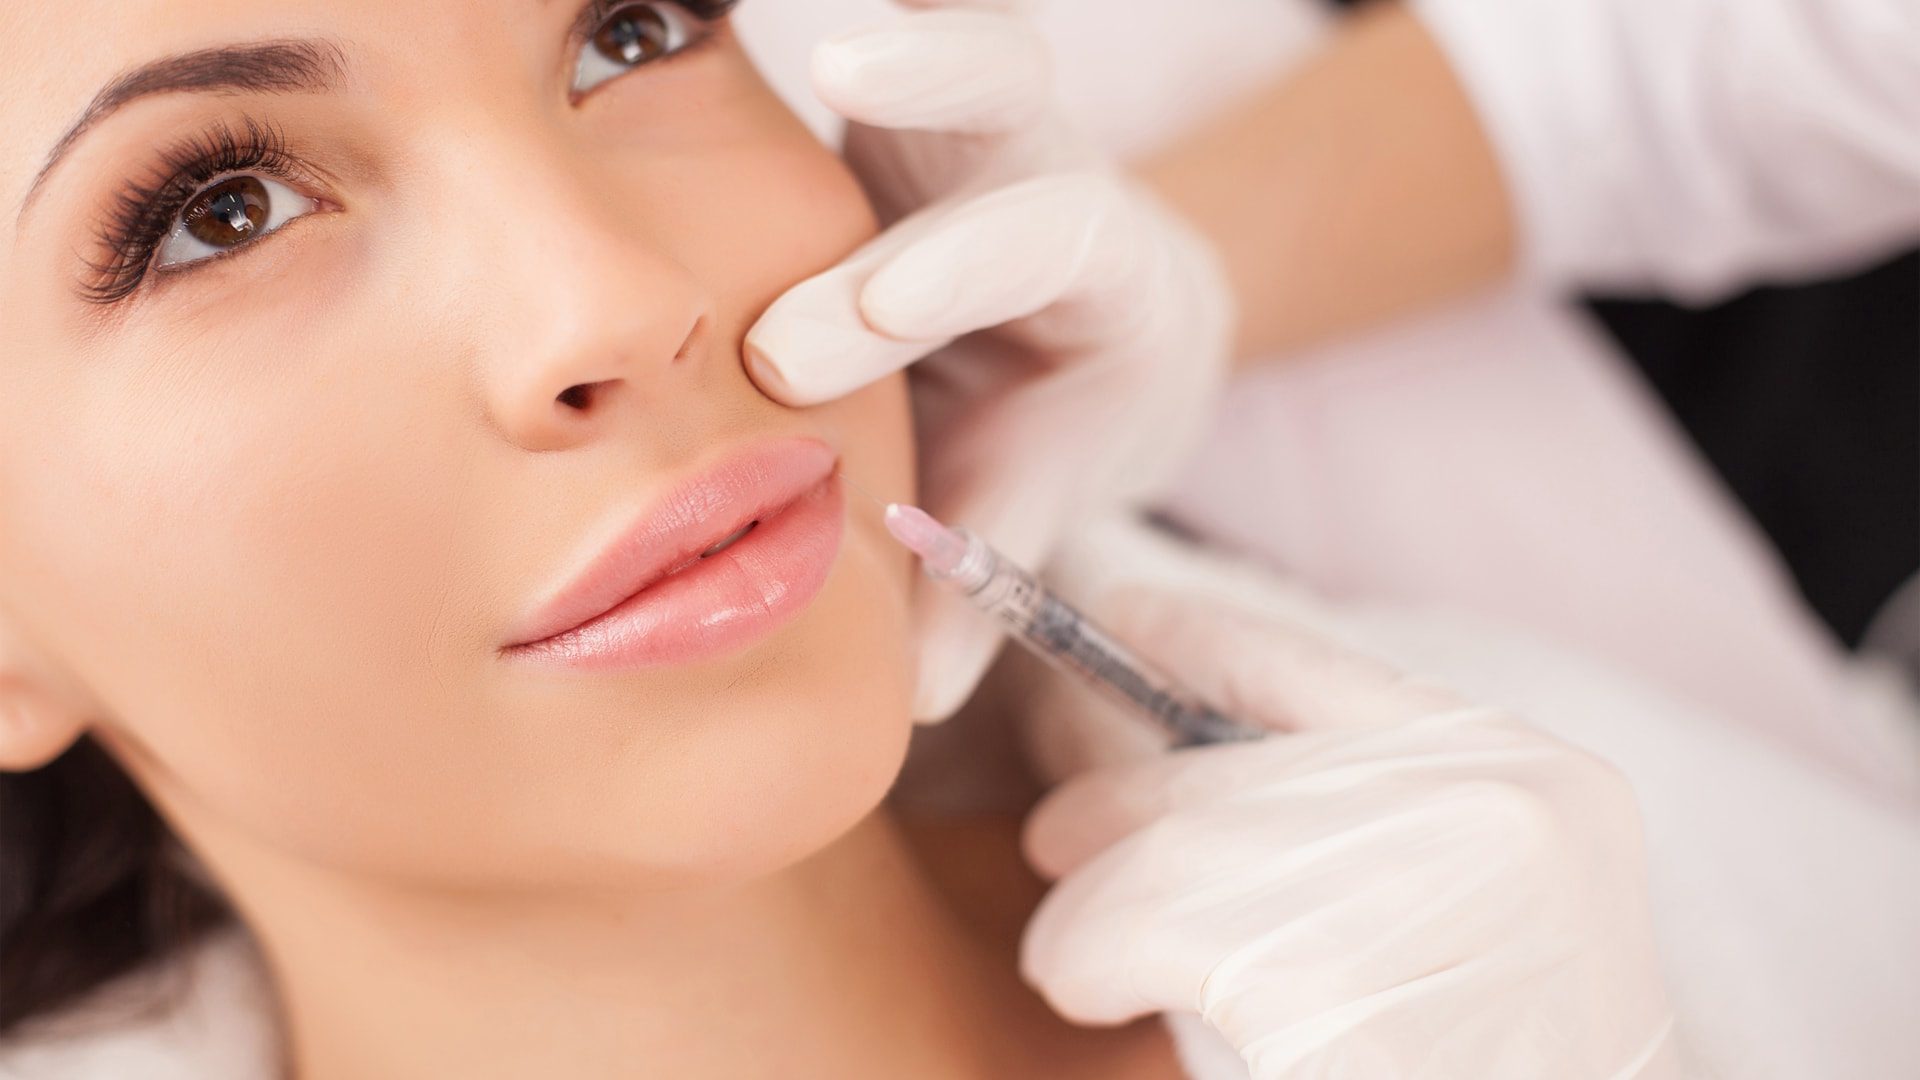 How Much Does Botox Cost and Is It Worth the Price? post thumbnail image